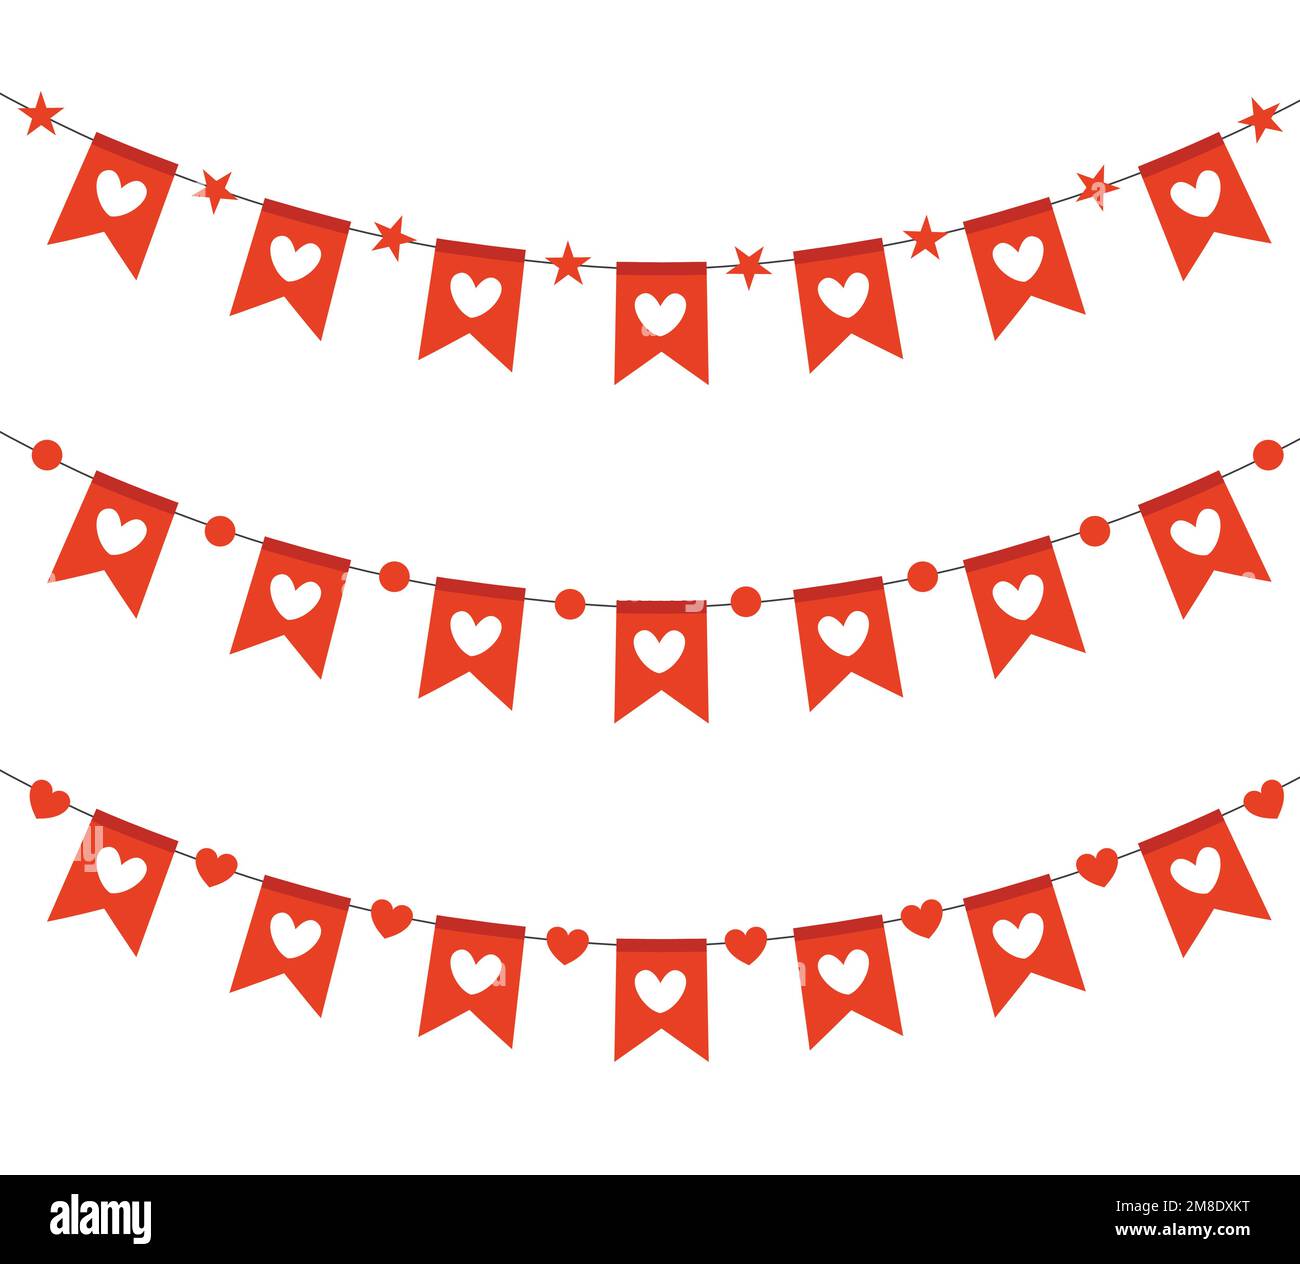 Red hearts banner set vector illustration isolated on white background ...